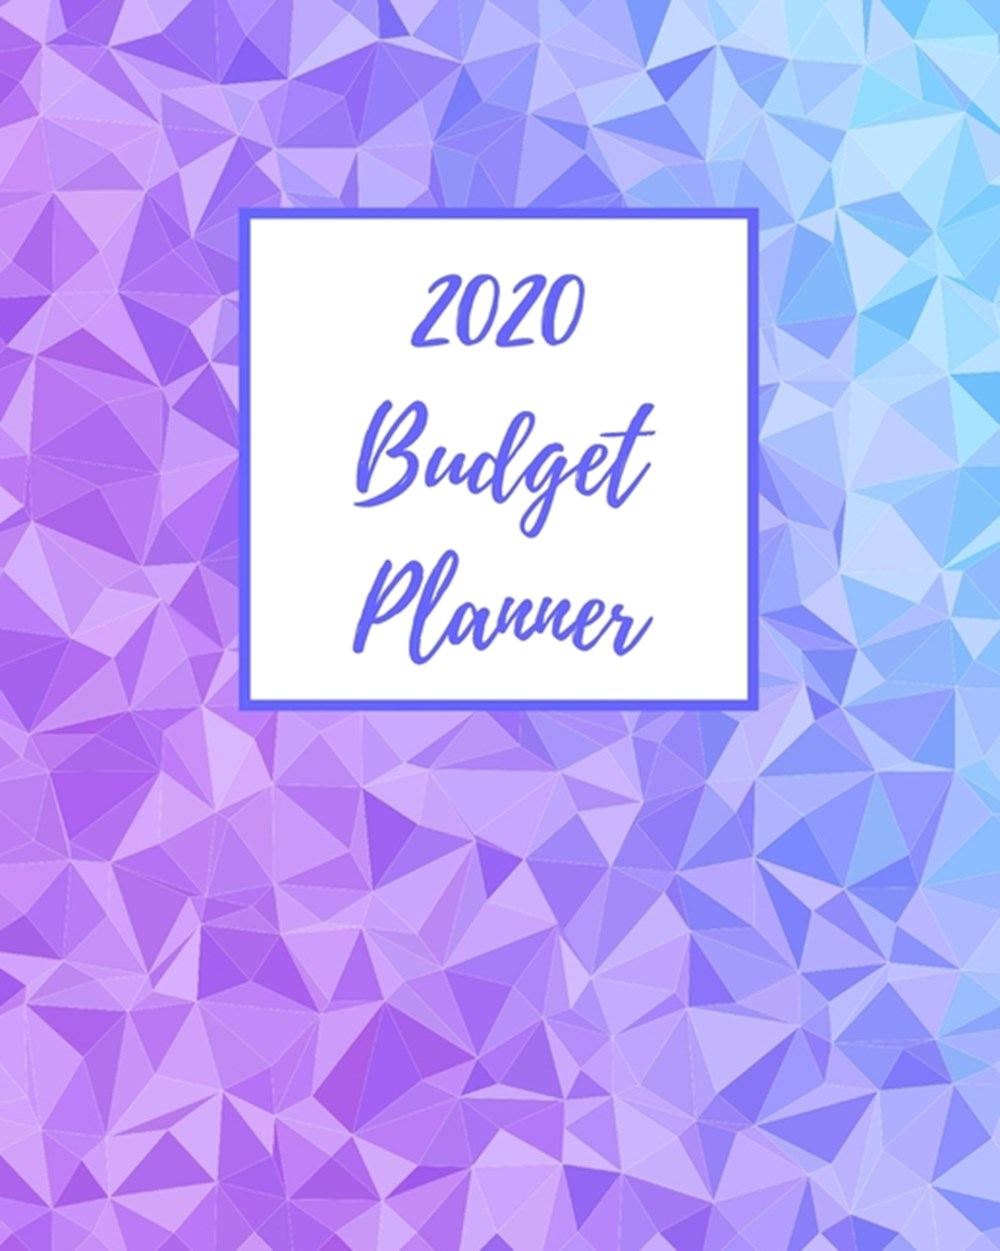 2020 Budget Planner Daily Weekly & Monthly Expense Tracker Organizer Financial Planner Workbook and 